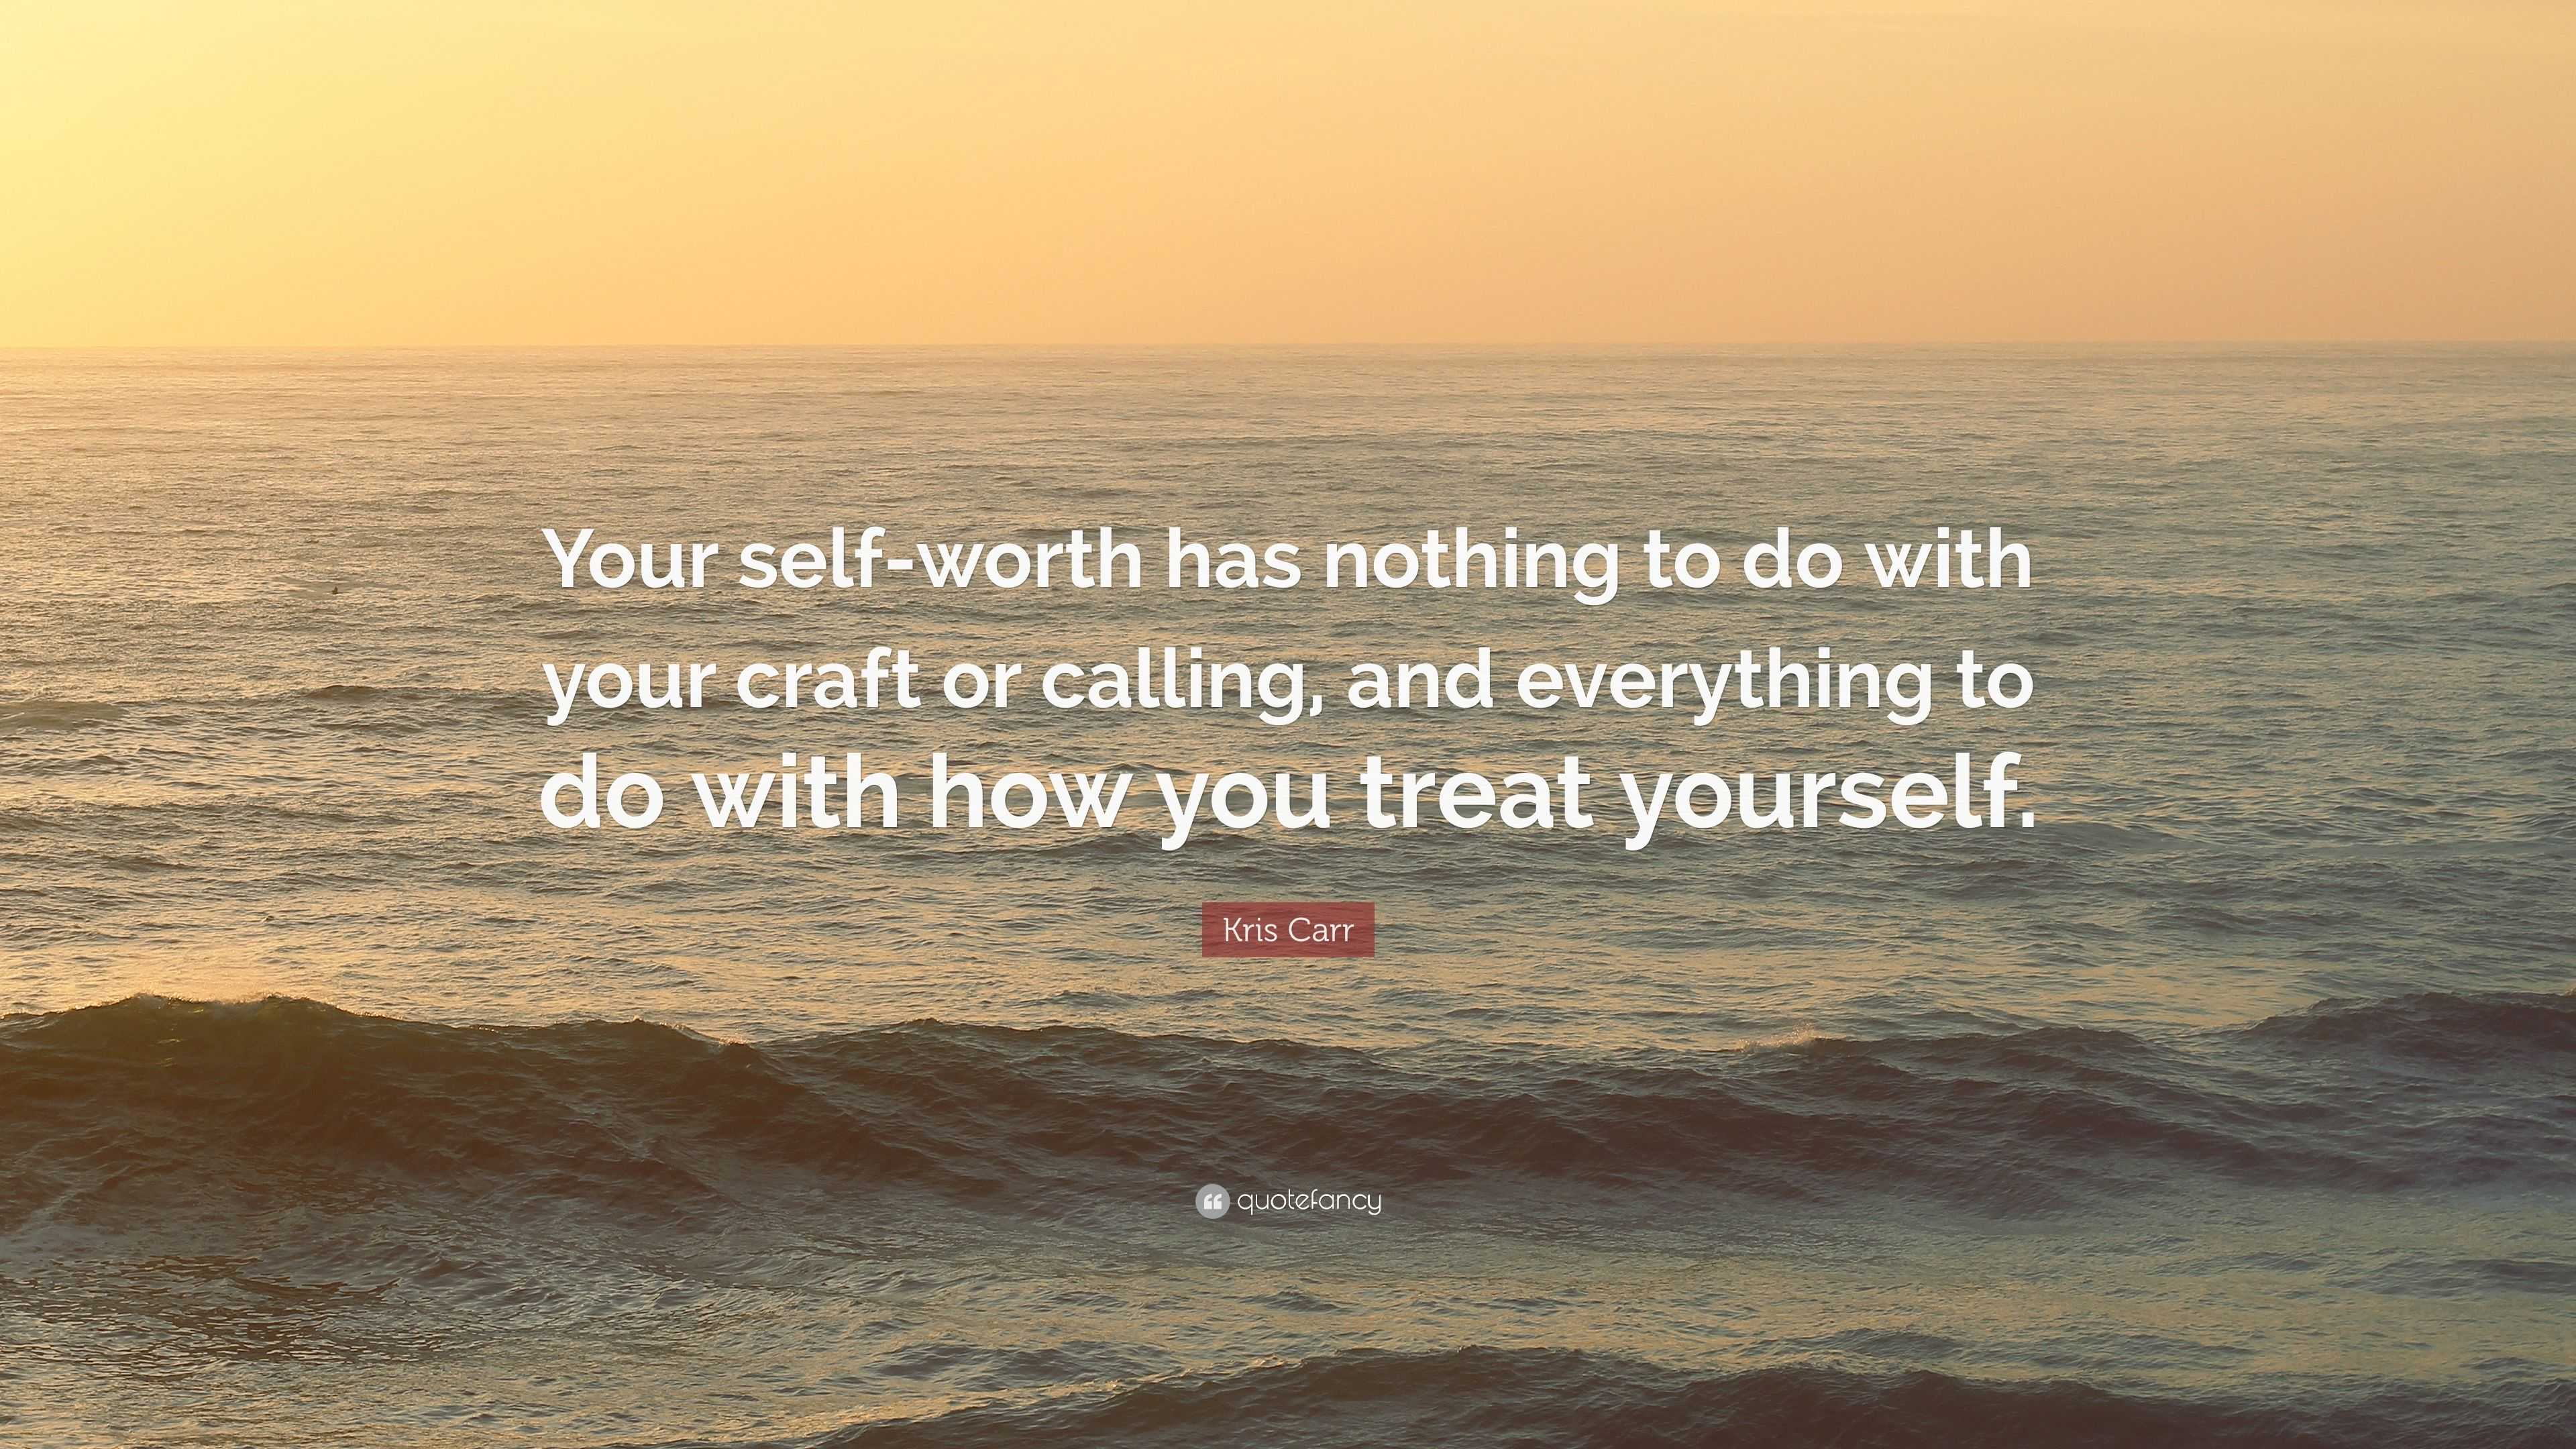 Kris Carr Quote: “Your self-worth has nothing to do with your craft or ...